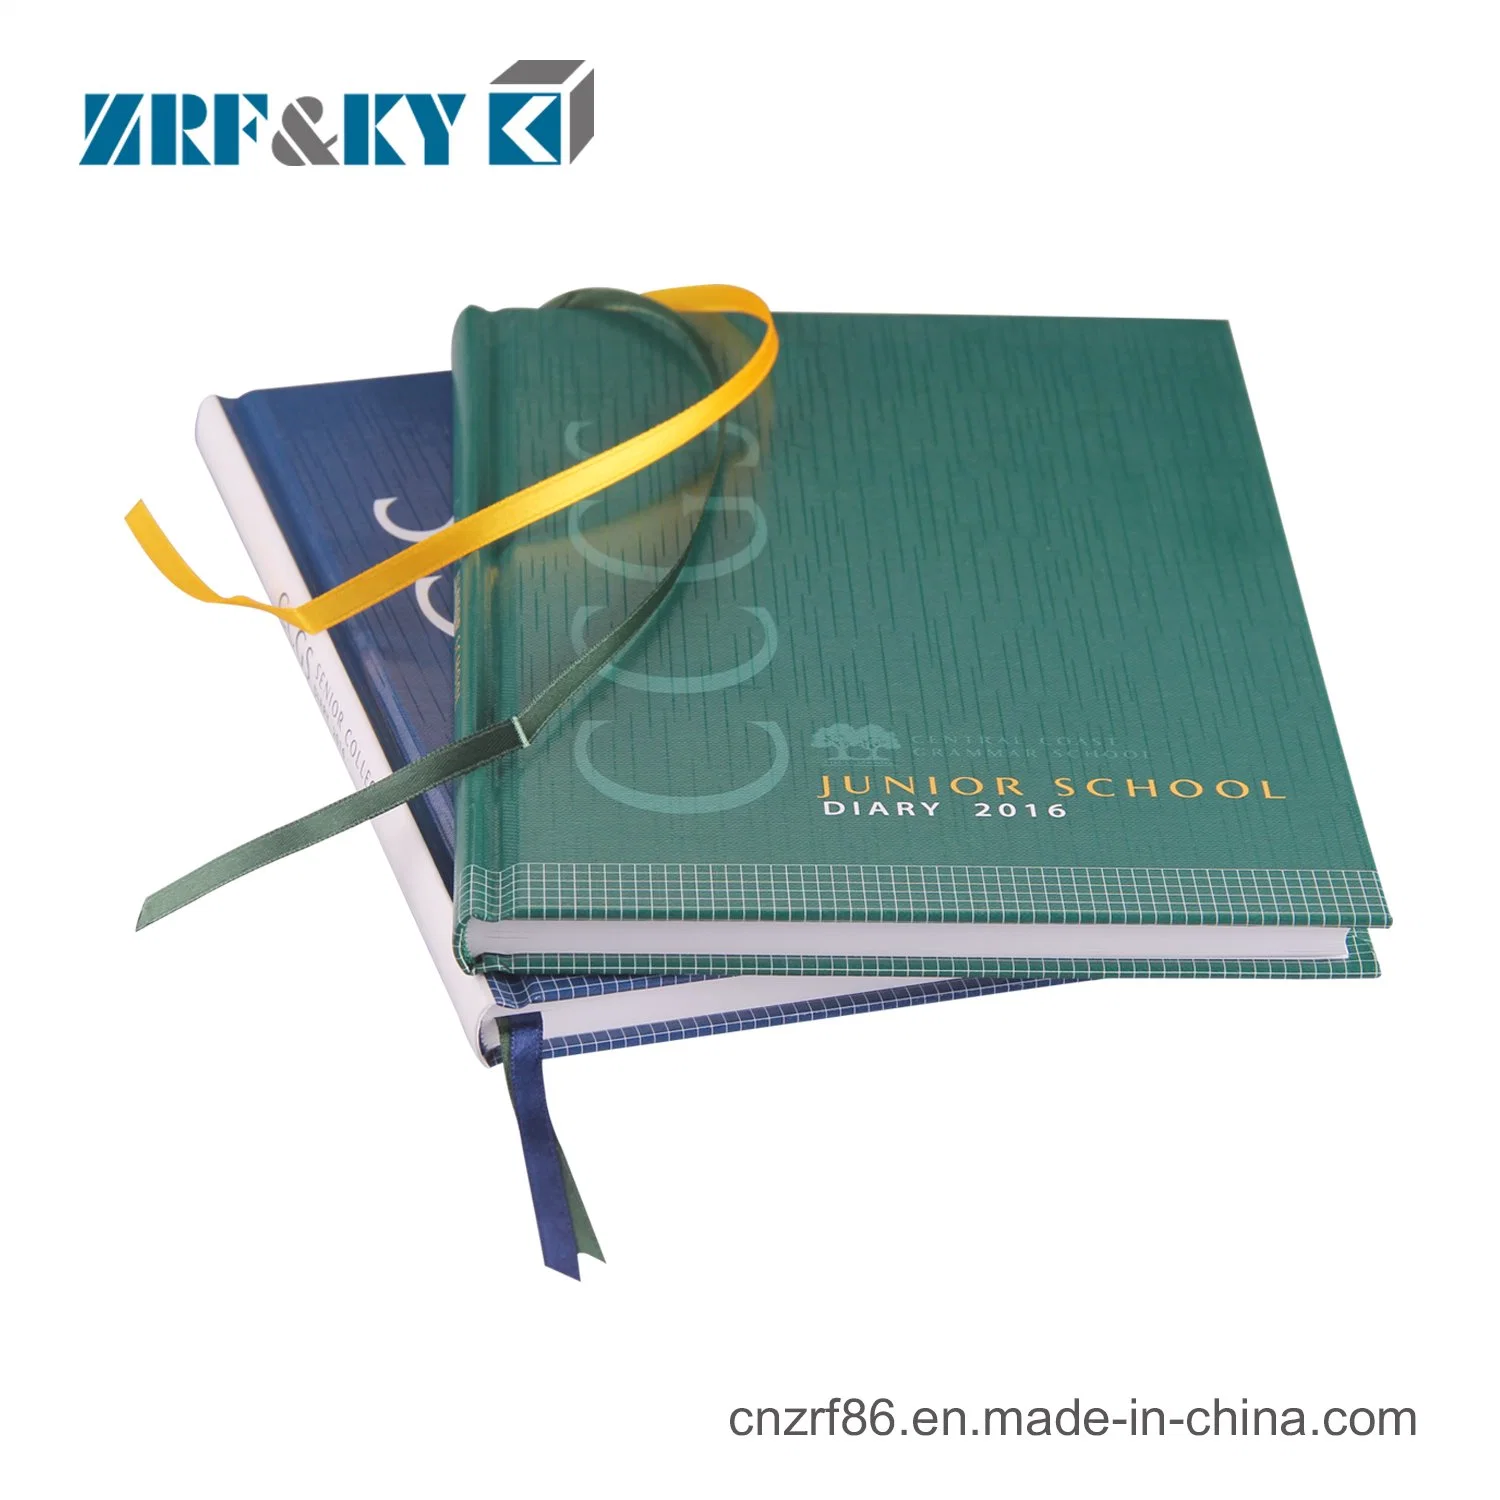 Customized Printing Service Spiral Blank Office/School Supply Stationery Notebook/Diary/Exercise Book